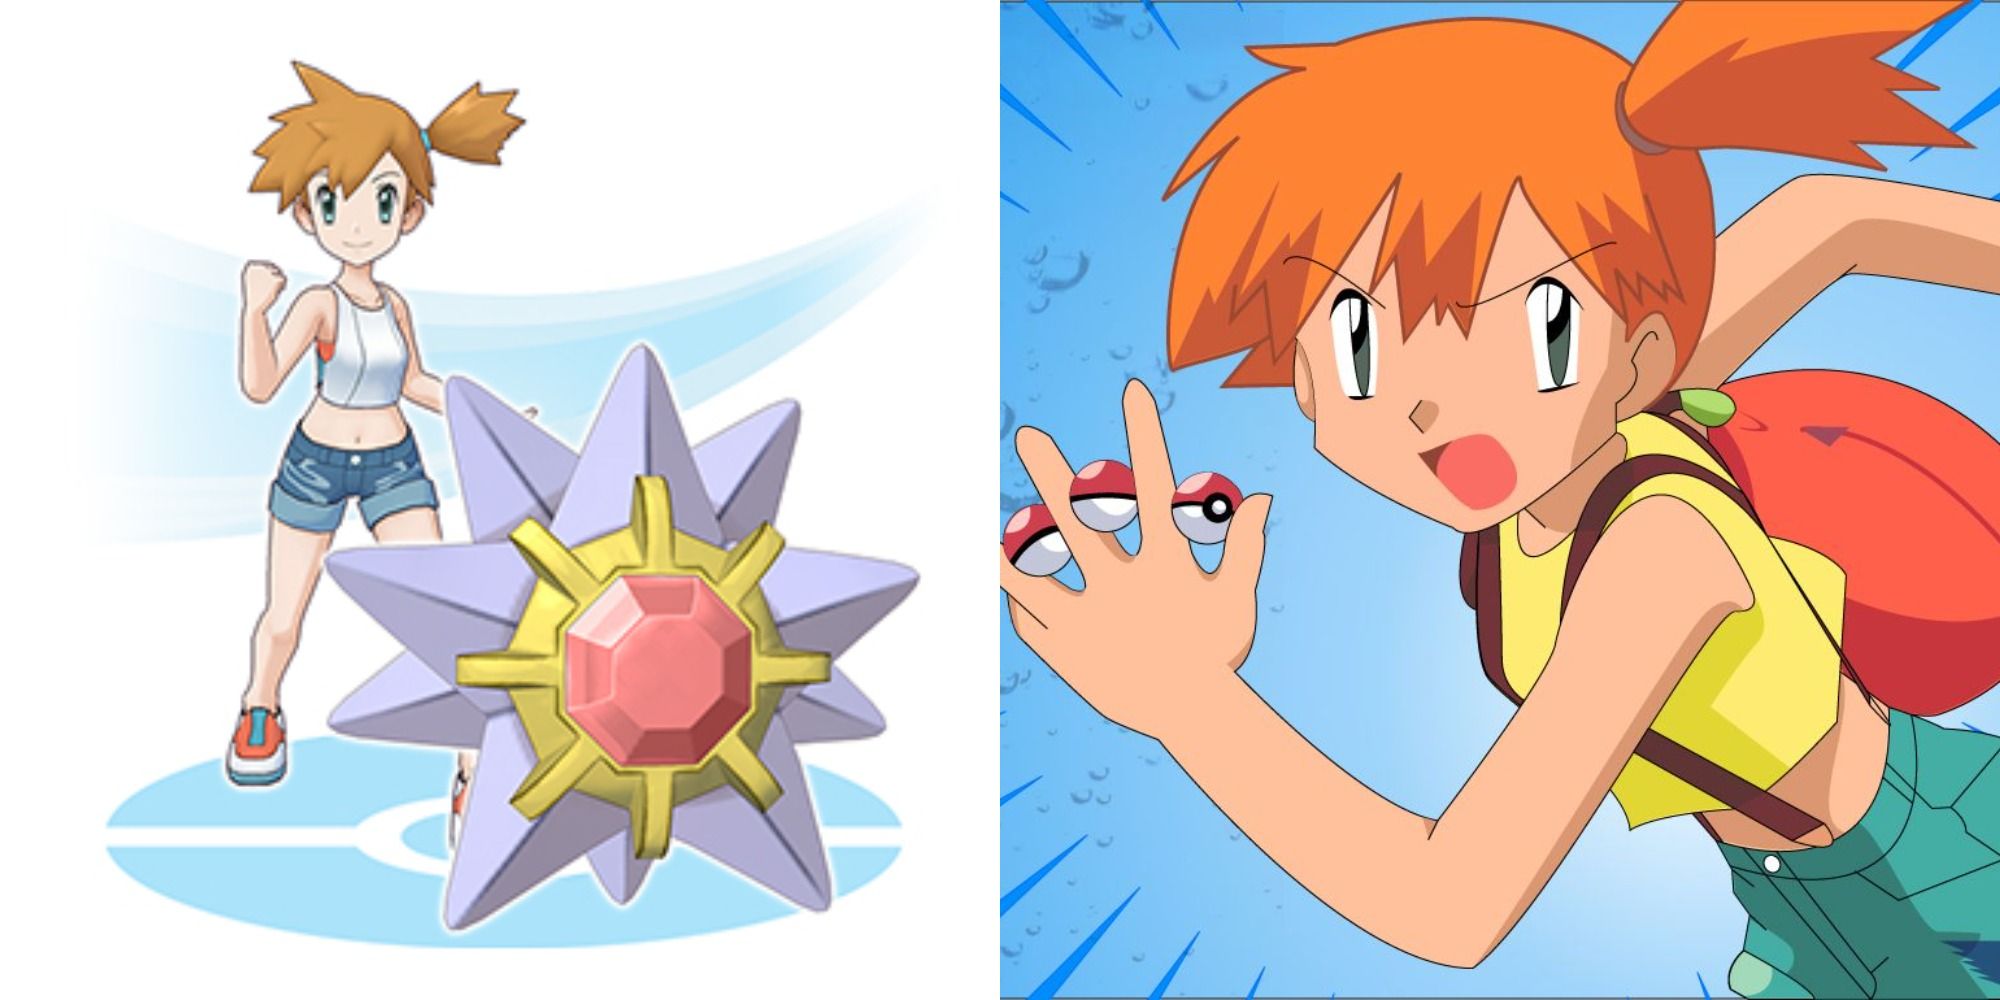 Split imager showing Misty's sprite with Starmie, and Misty in the anime hoding three Pokéballs on her hand